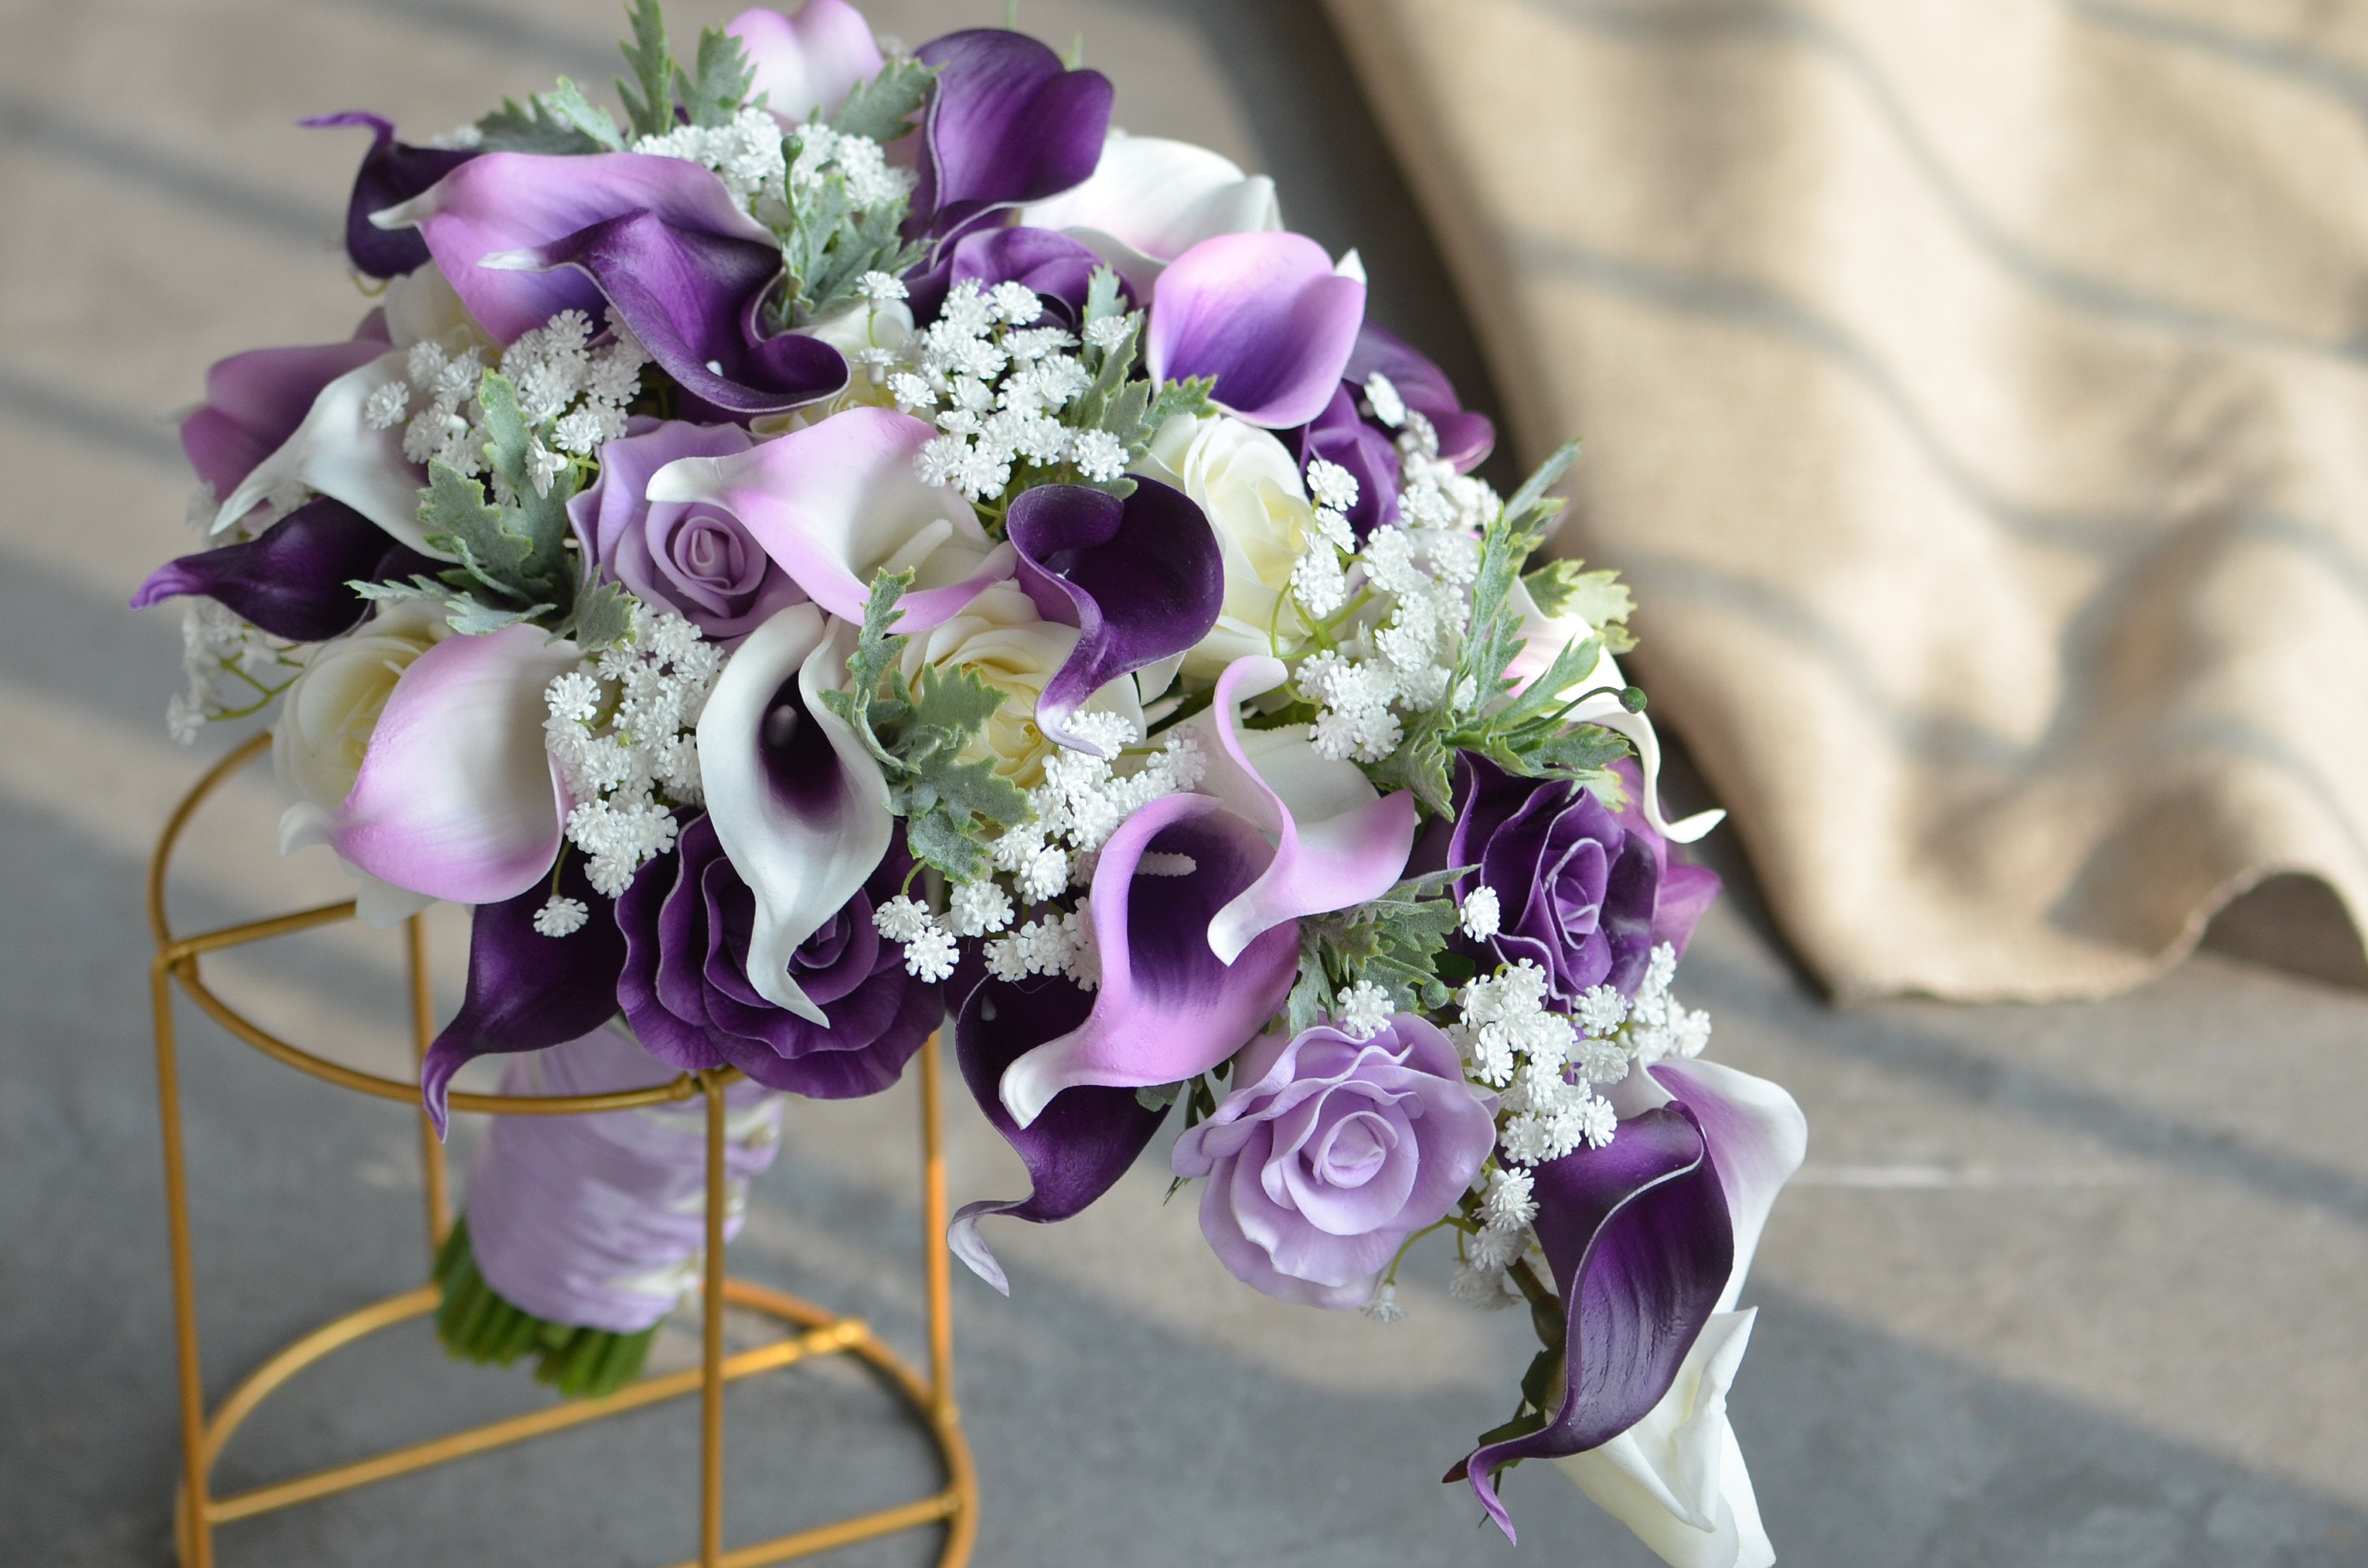 Fake Purple Bridal Bouquets, Bridesmaids - Etsy Silk Roses, Bouquets, Rustic Ivory Lilies, Touch Breath Sweden Baby\'s Calla Bridal Bouquet, Real White